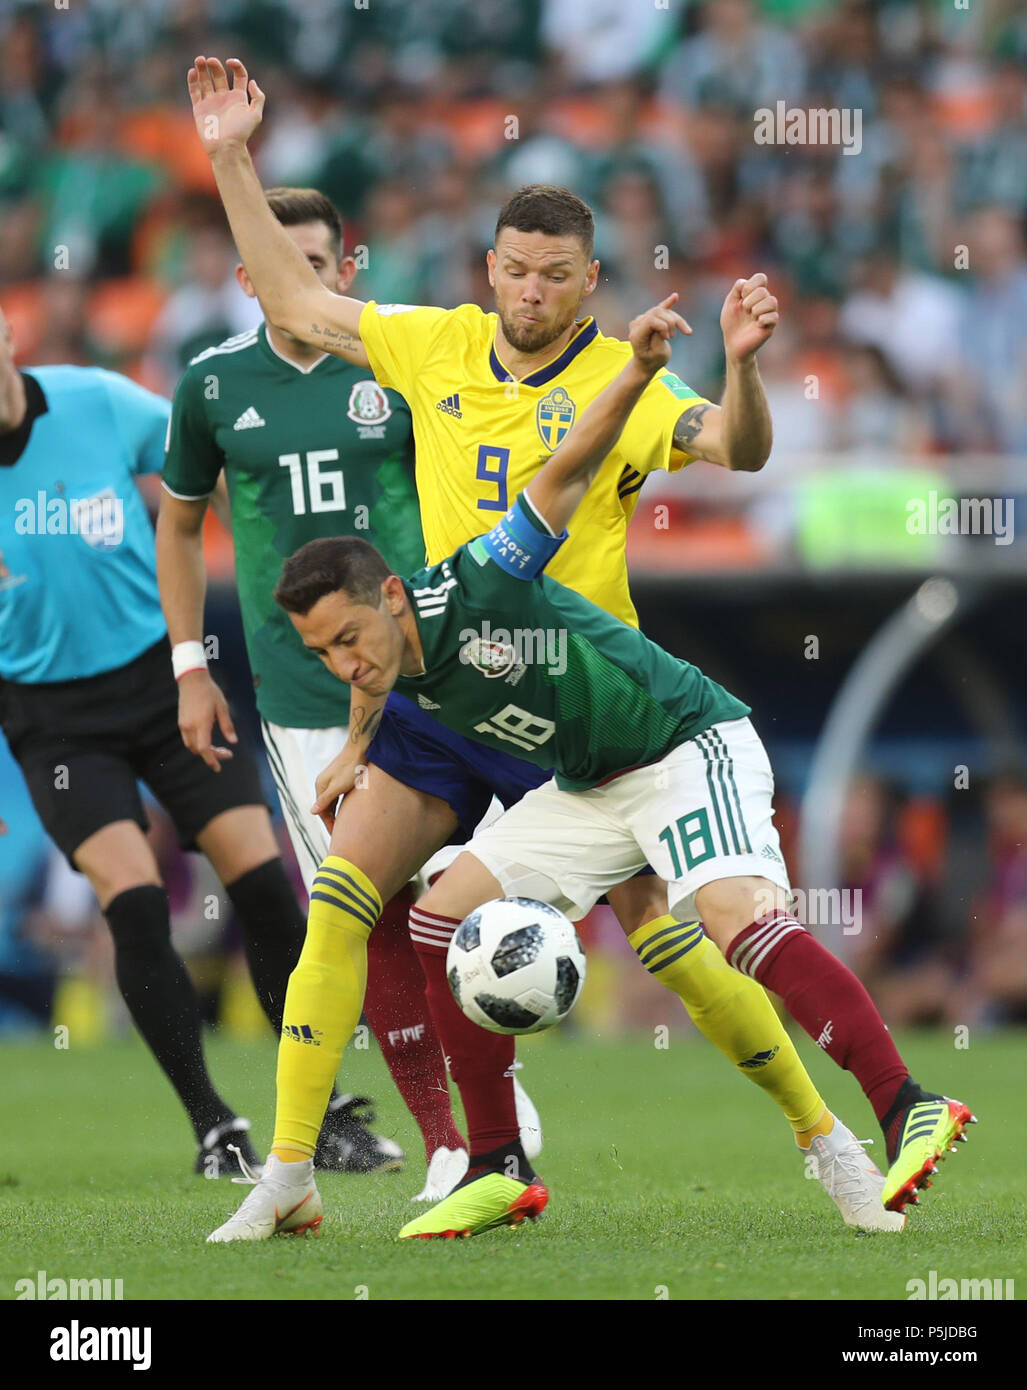 Yekaterinburg, Russia. 27th June, 2018. Andres Guardado (bottom) of Mexico vies with Marcus Berg of Sweden during the 2018 FIFA World Cup Group F match between Mexico and Sweden in Yekaterinburg, Russia, June 27, 2018. Credit: Lu Jinbo/Xinhua/Alamy Live News Stock Photo